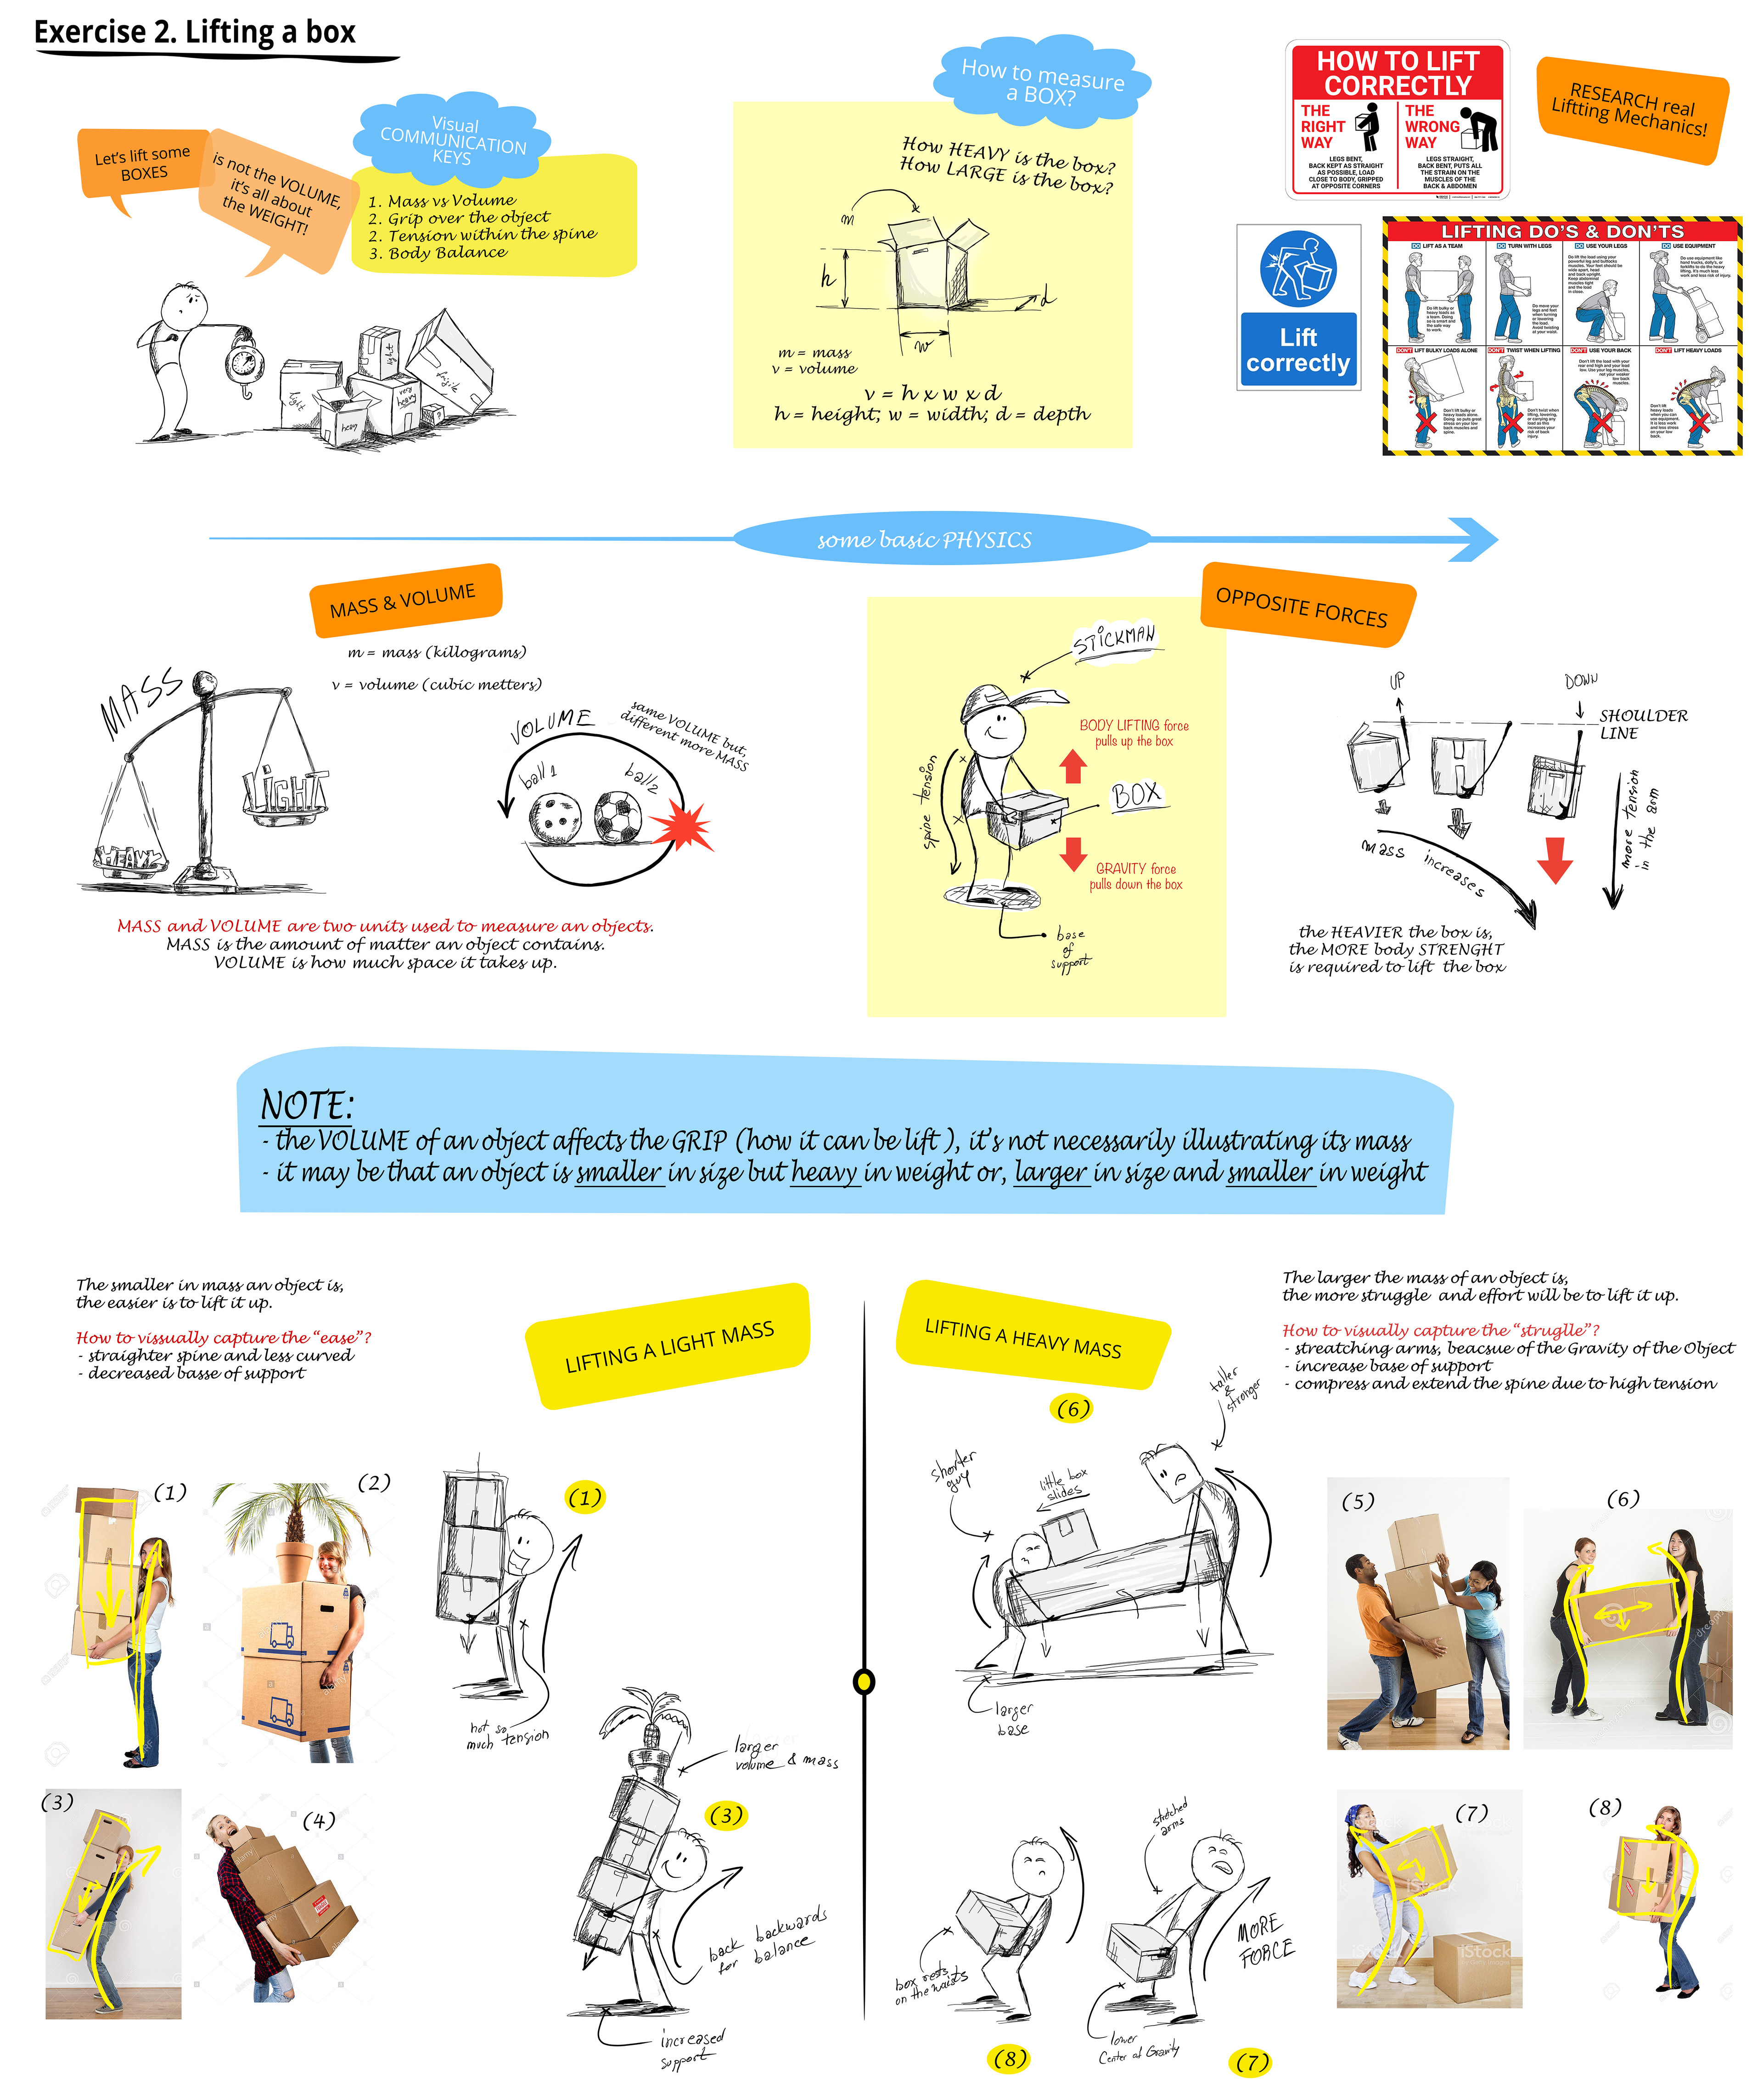 Exercise 2. Box Lift Postures. Exploration of multiple poses, in different scenarios of lifting various boxes (objects) in terms of volume and mass.